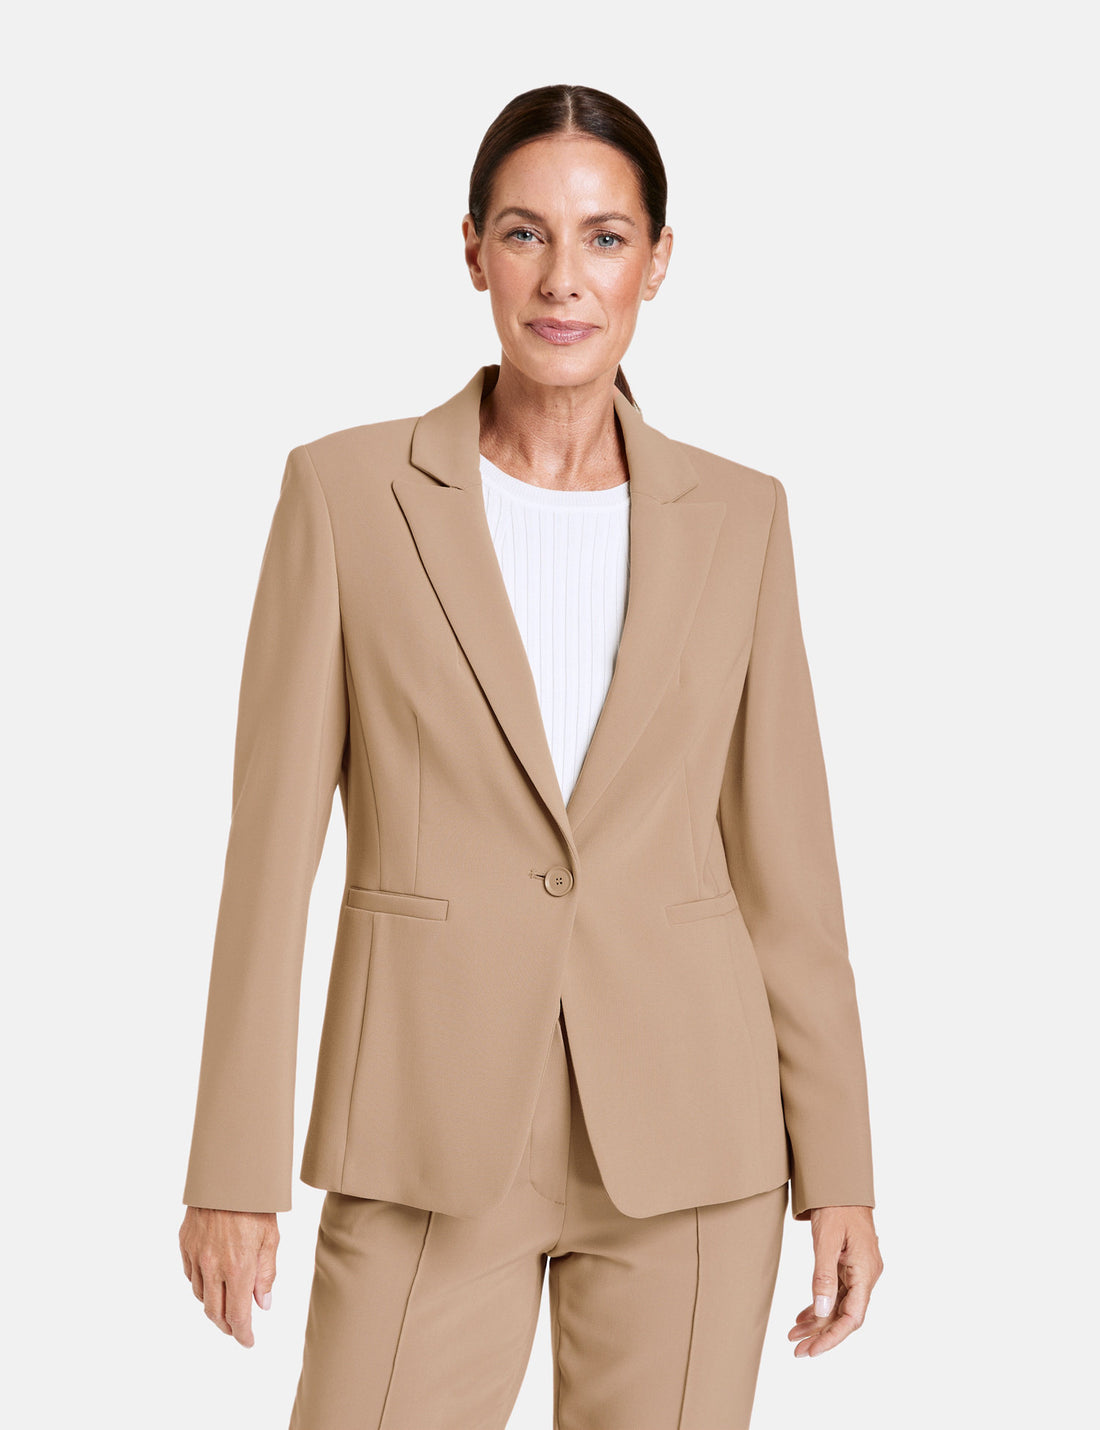 Flowing Blazer With Added Stretch For Comfort_935021-31340_90540_01